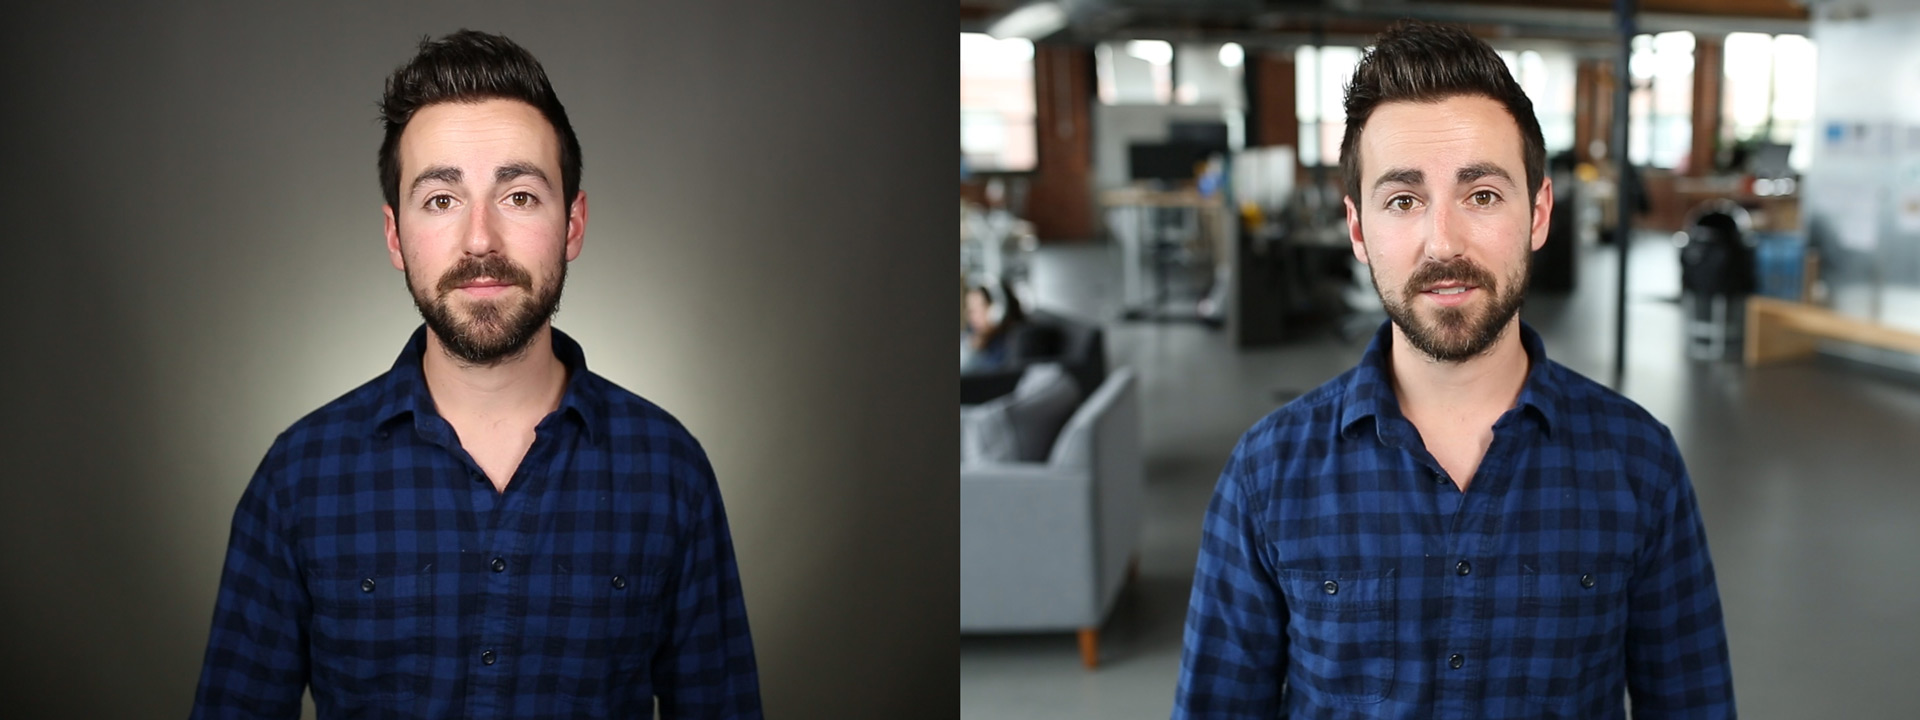 Choosing a Background for Your Video - Wistia Blog